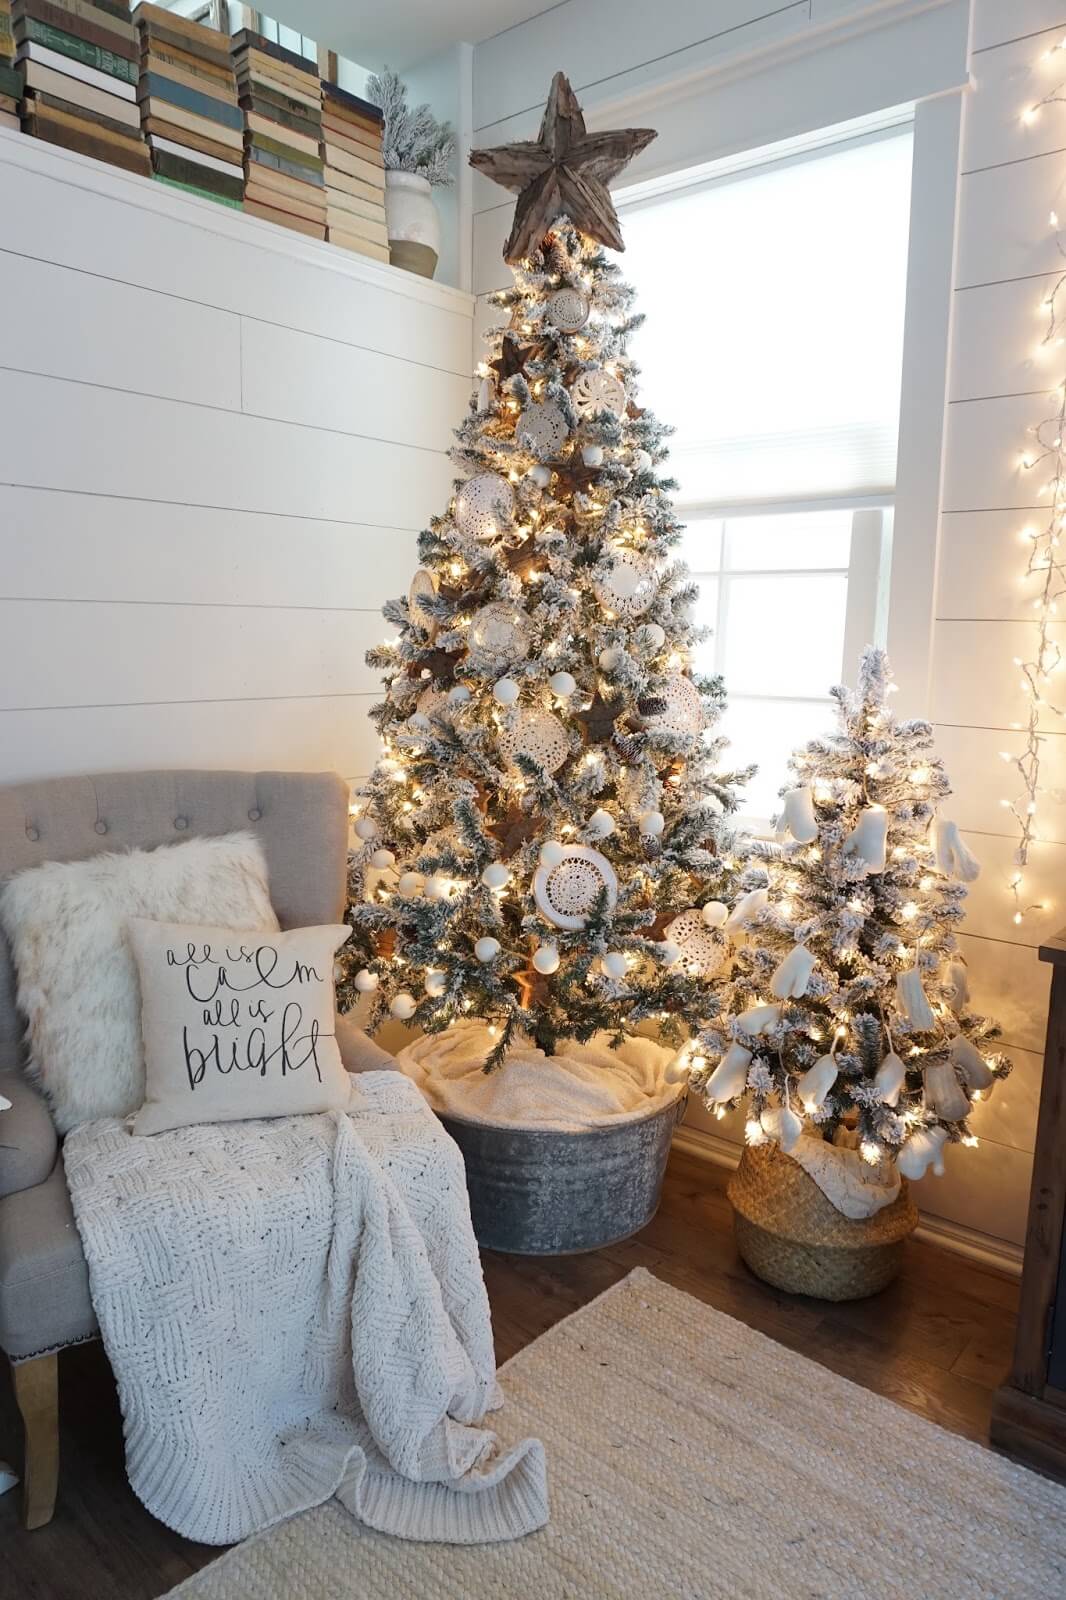 Breathtaking Dual Christmas Tree and Pillows Design